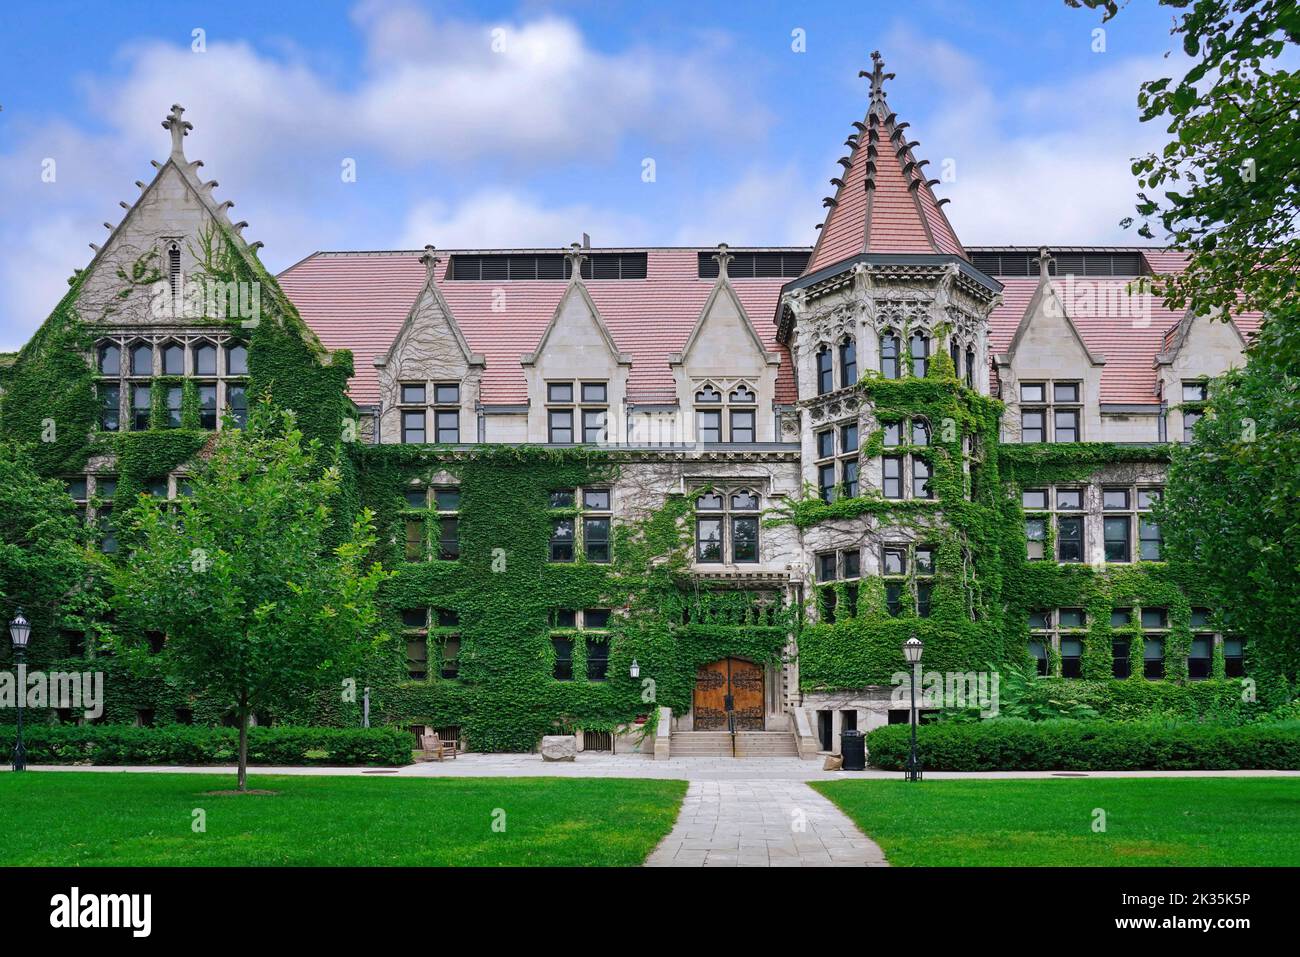 Chicago, USA - August 2022:  An ivy covered gothic style building typical of the architecture of the older section of the University of Chicago on its Stock Photo